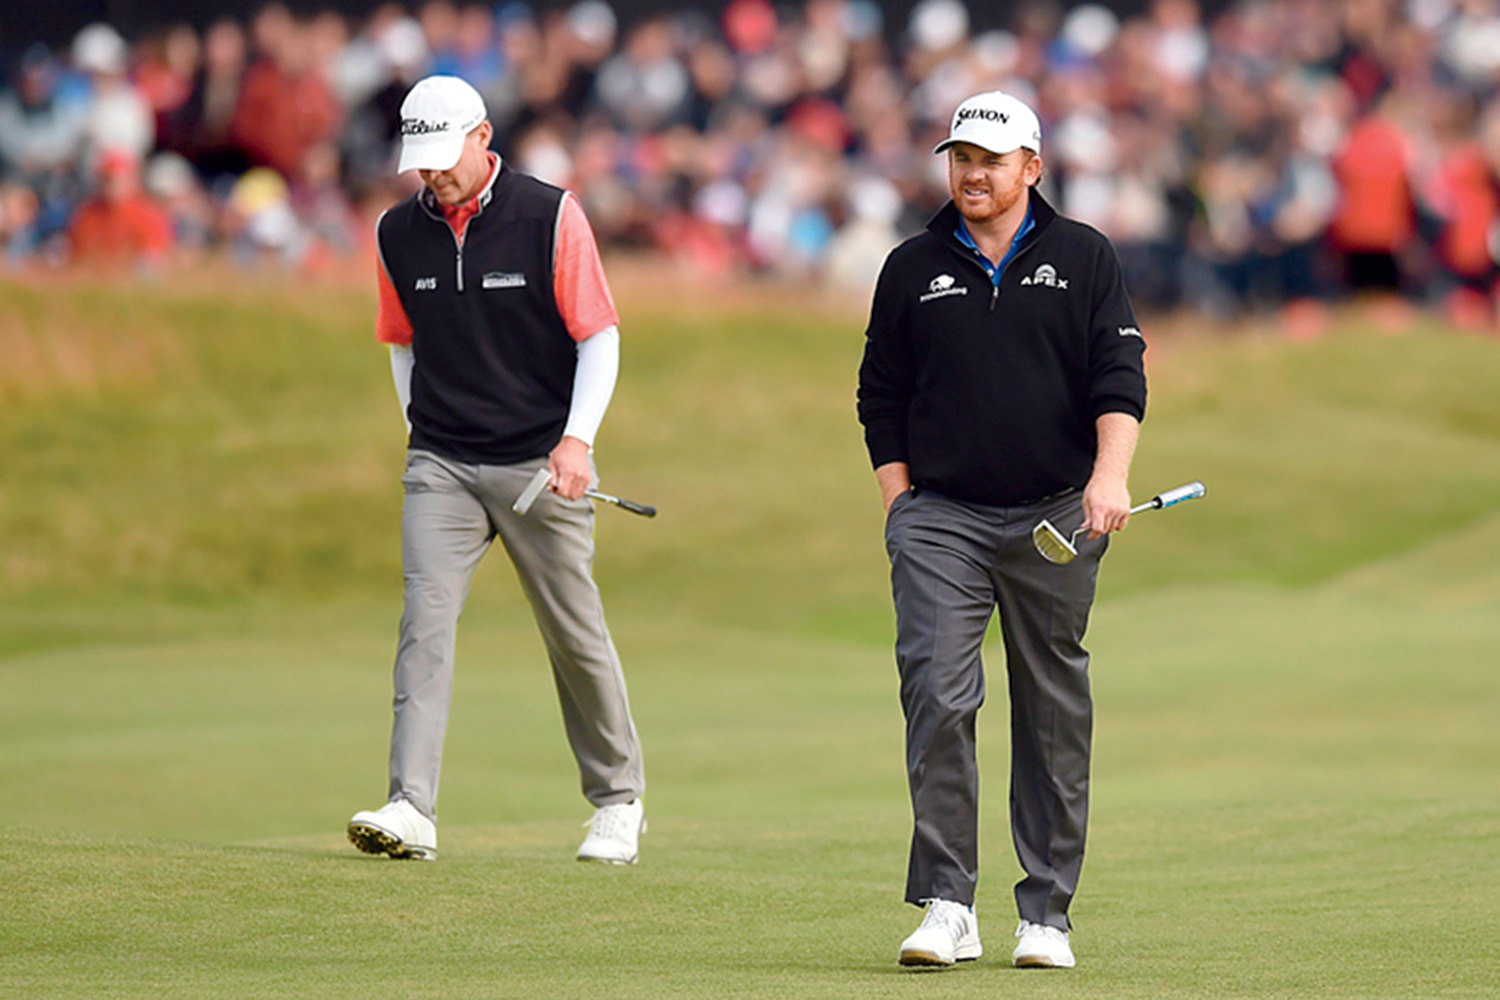 ’You’re getting beat by 100, so it’s not a lot of fun.’ – Steve Stricker (left),who finished fourth, 15 strokes behind Stenson, with J.B. Holmes (right), who was third, trailing the winner by 14 shots.